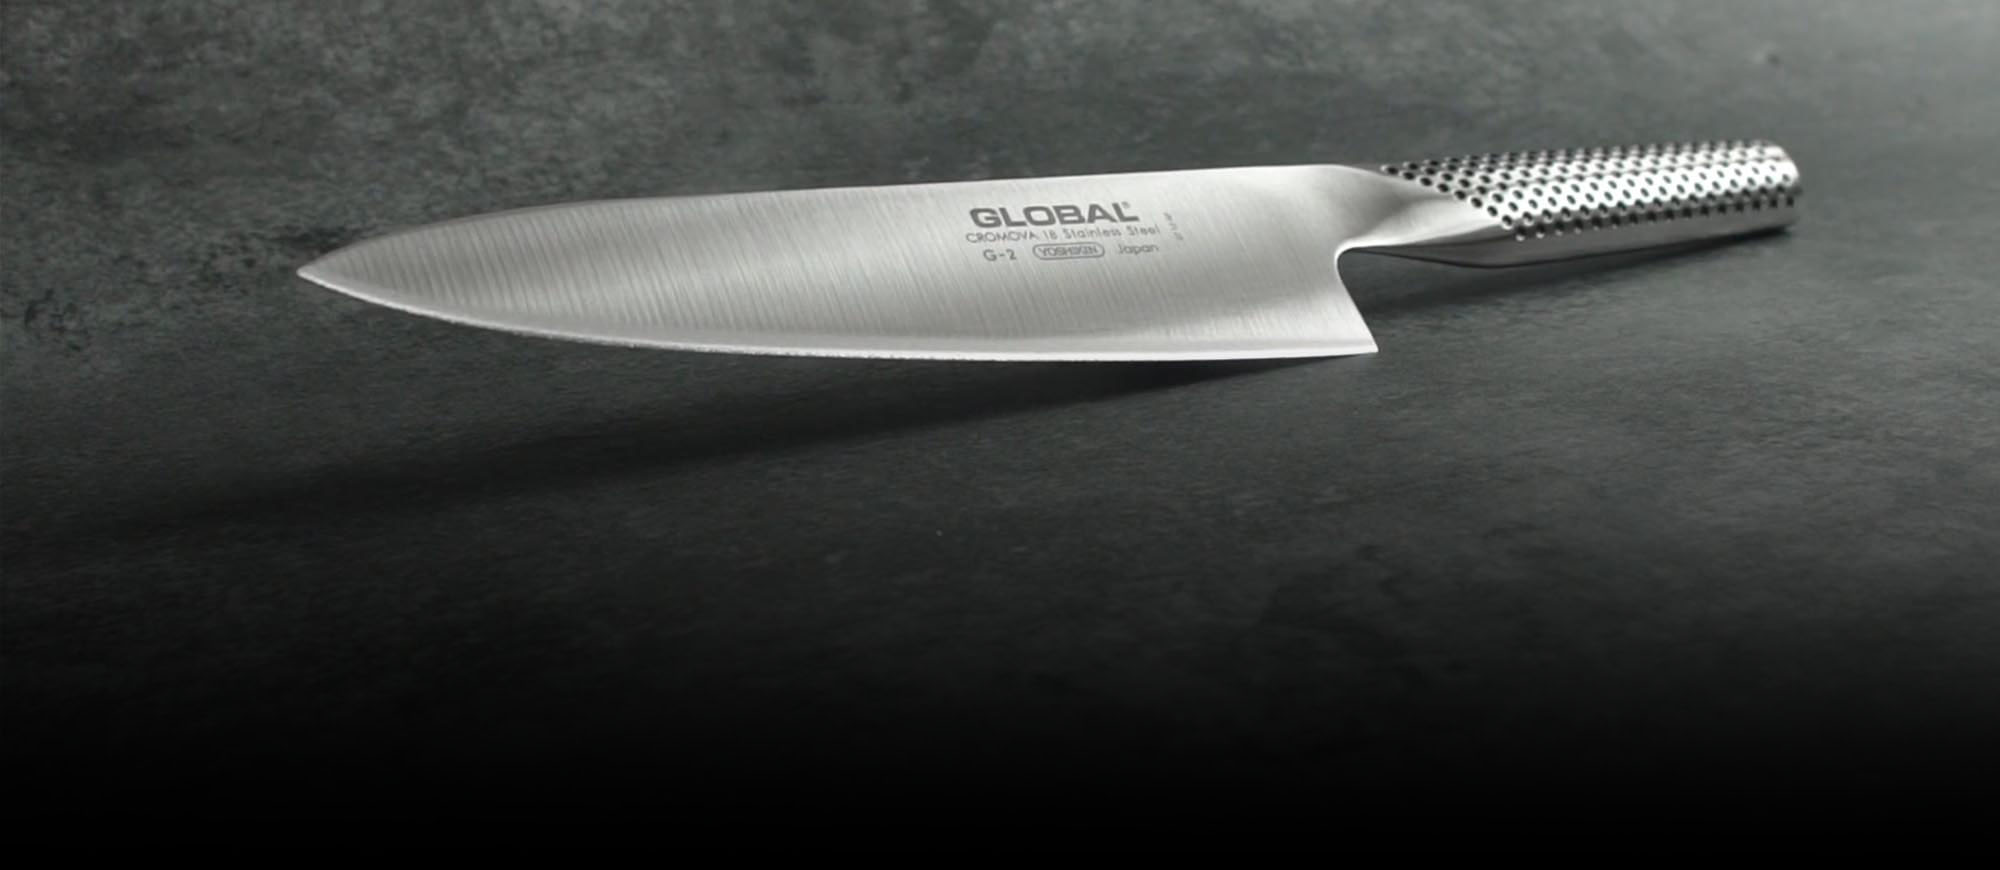 About Global - Cutlery USA | Cutlery USA